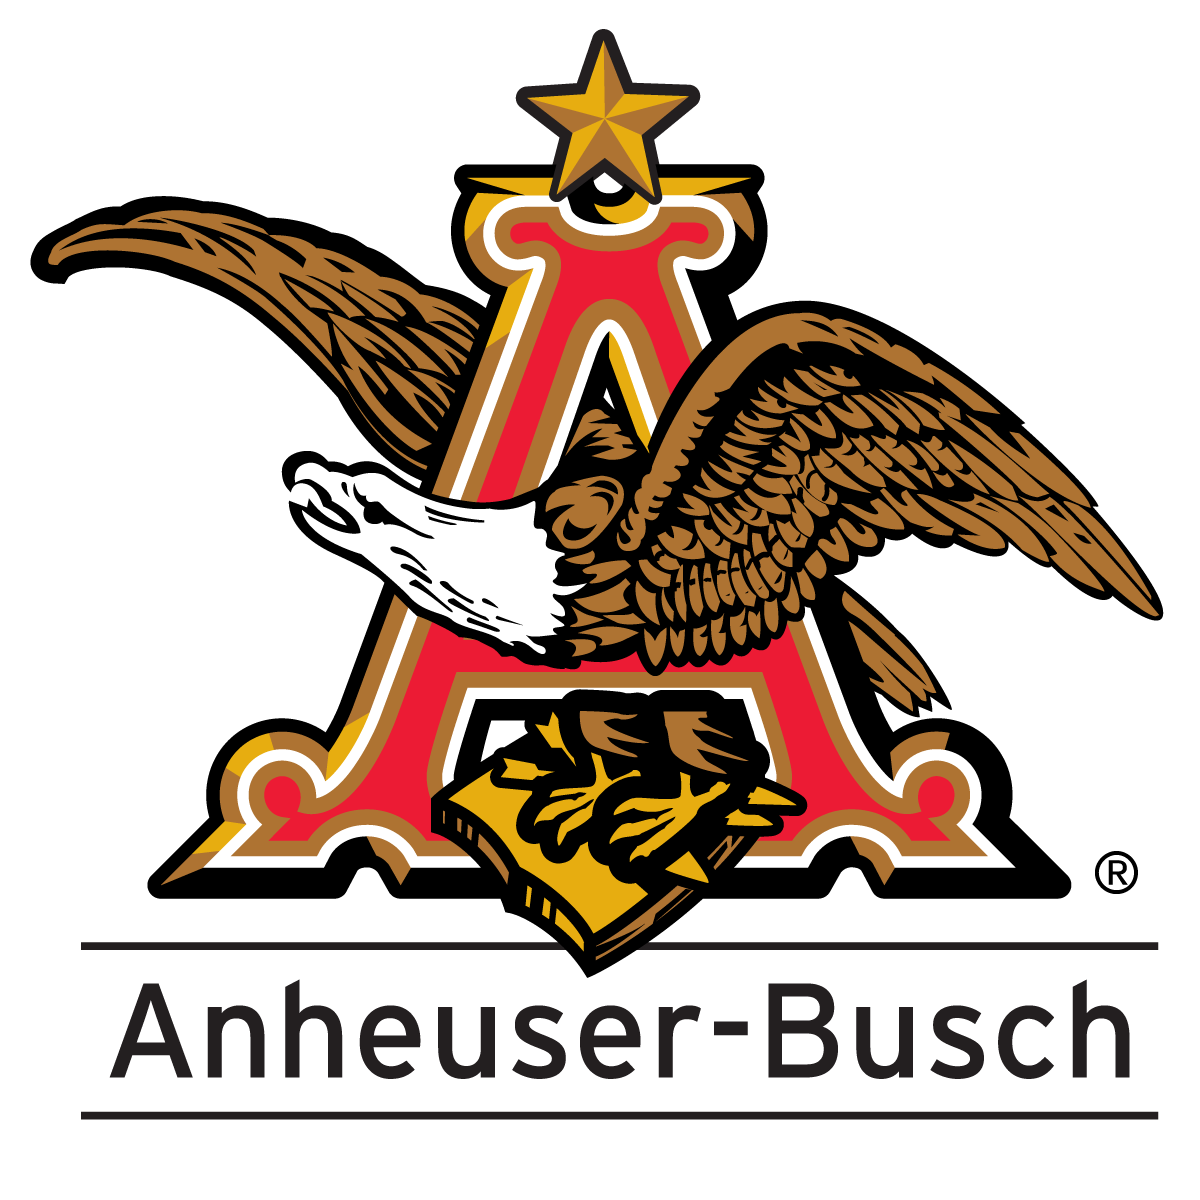 Anheuser-Busch Products